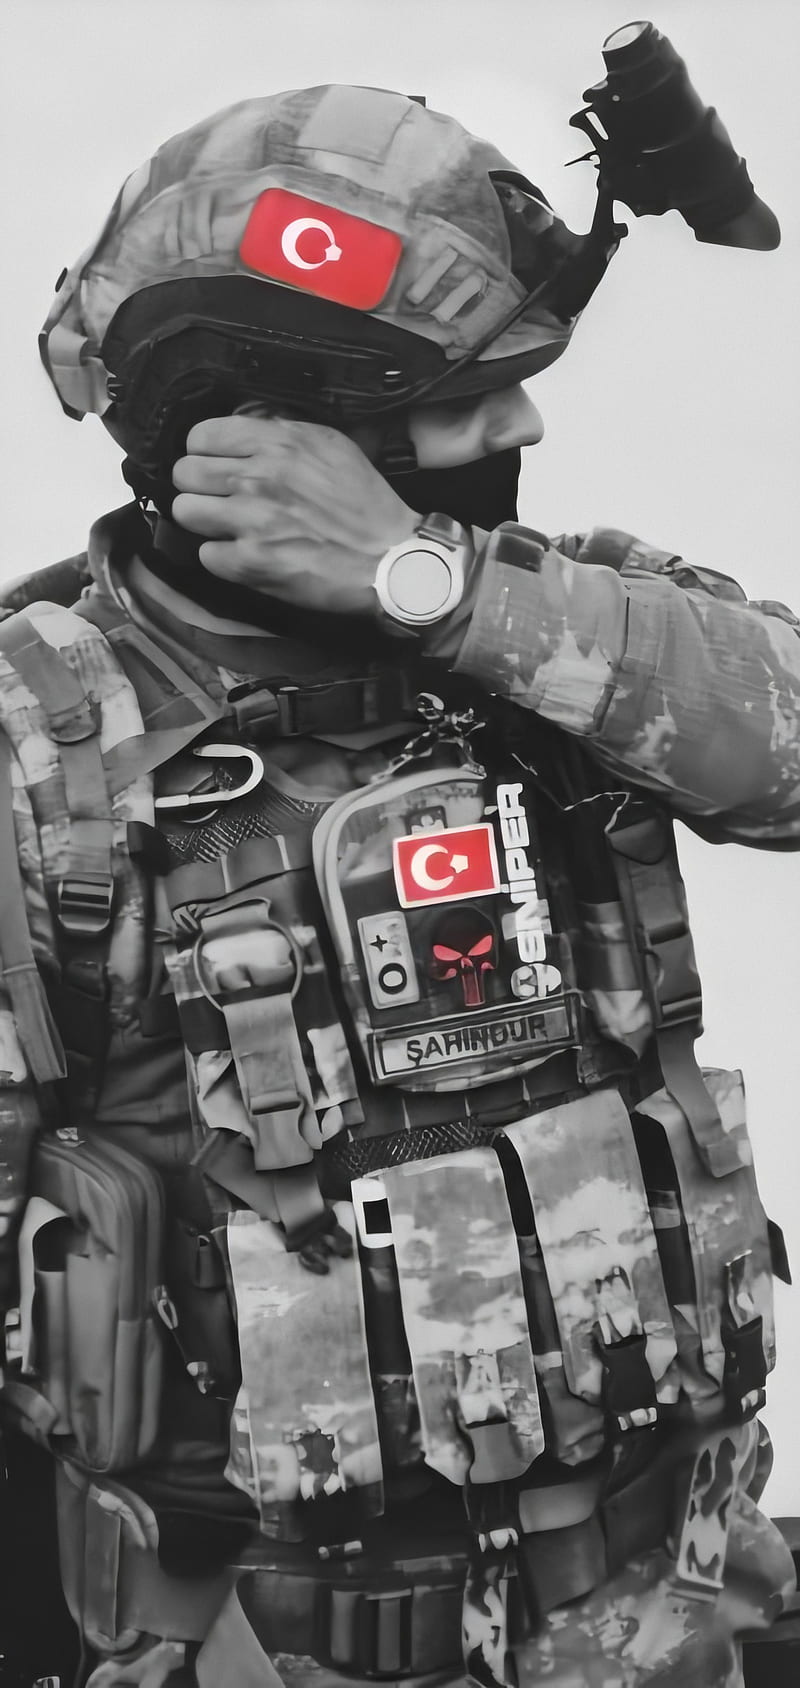 TSK, army, asker, military, sniper, soldier, soldiers, special forces, turk, turk askeri, turkish soldier, HD phone wallpaper